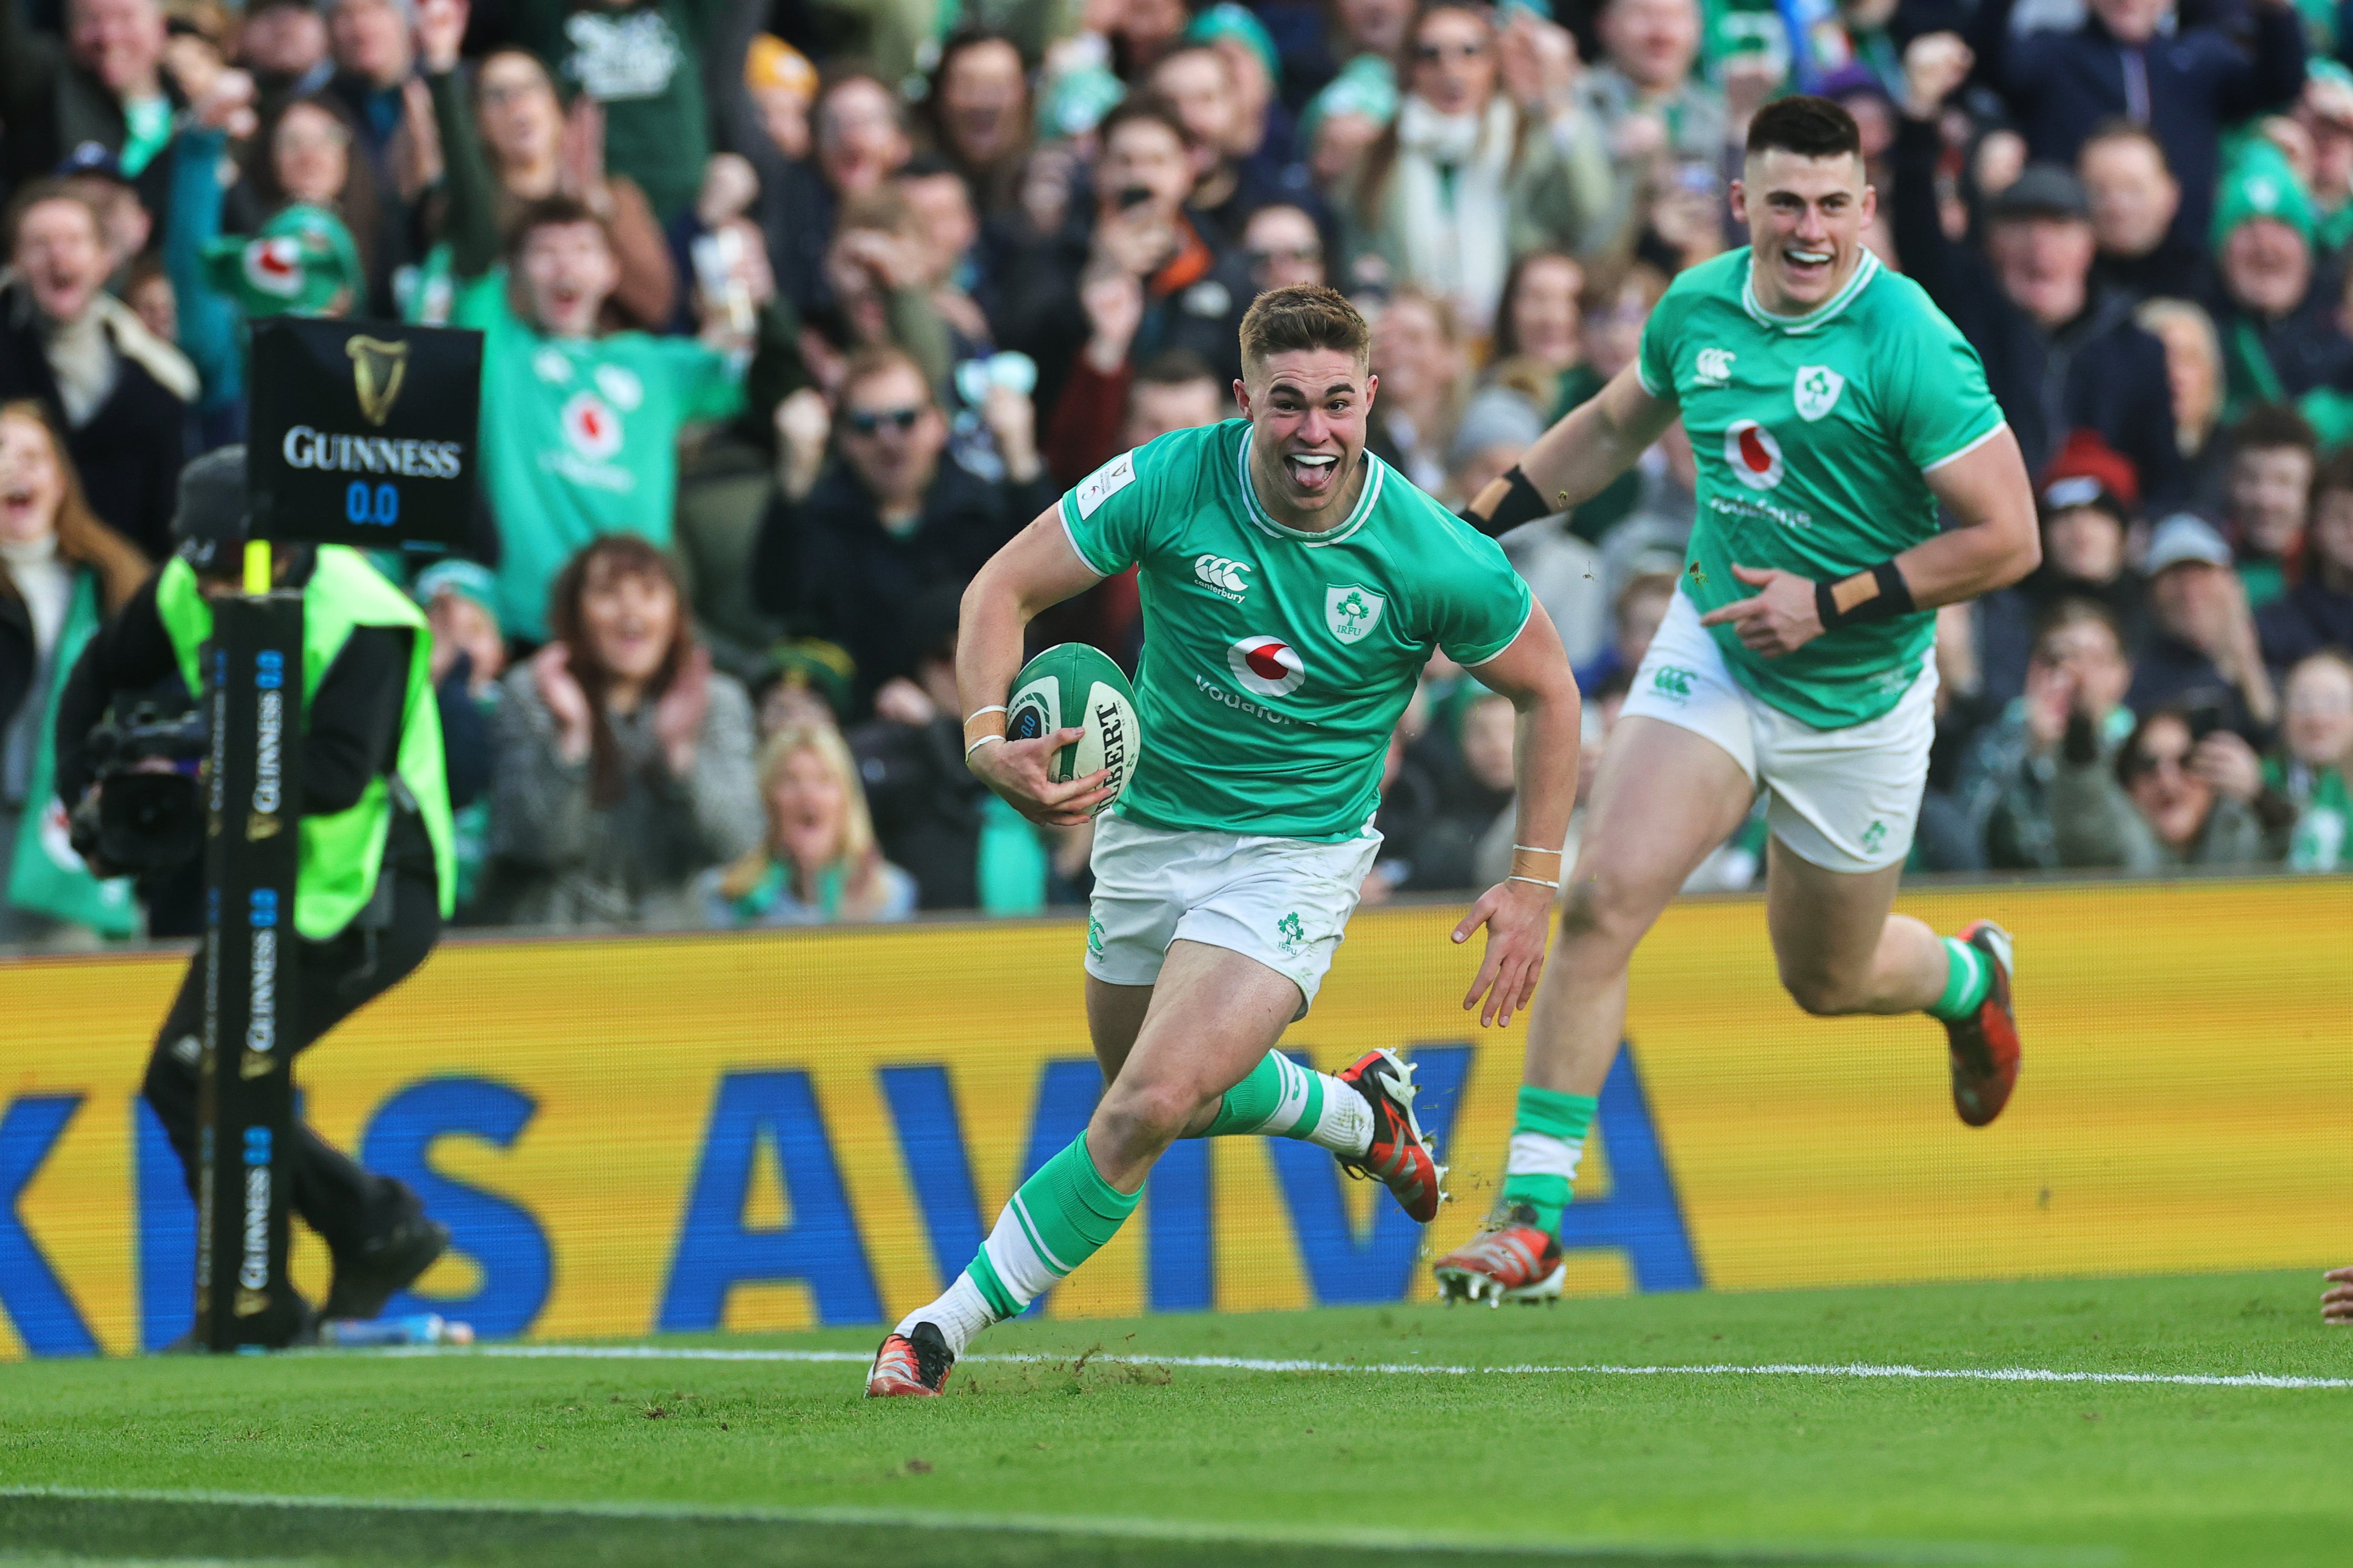 Crowley has – so far – been a positive force in the fly half position still so associated with the retired Johnny Sexton